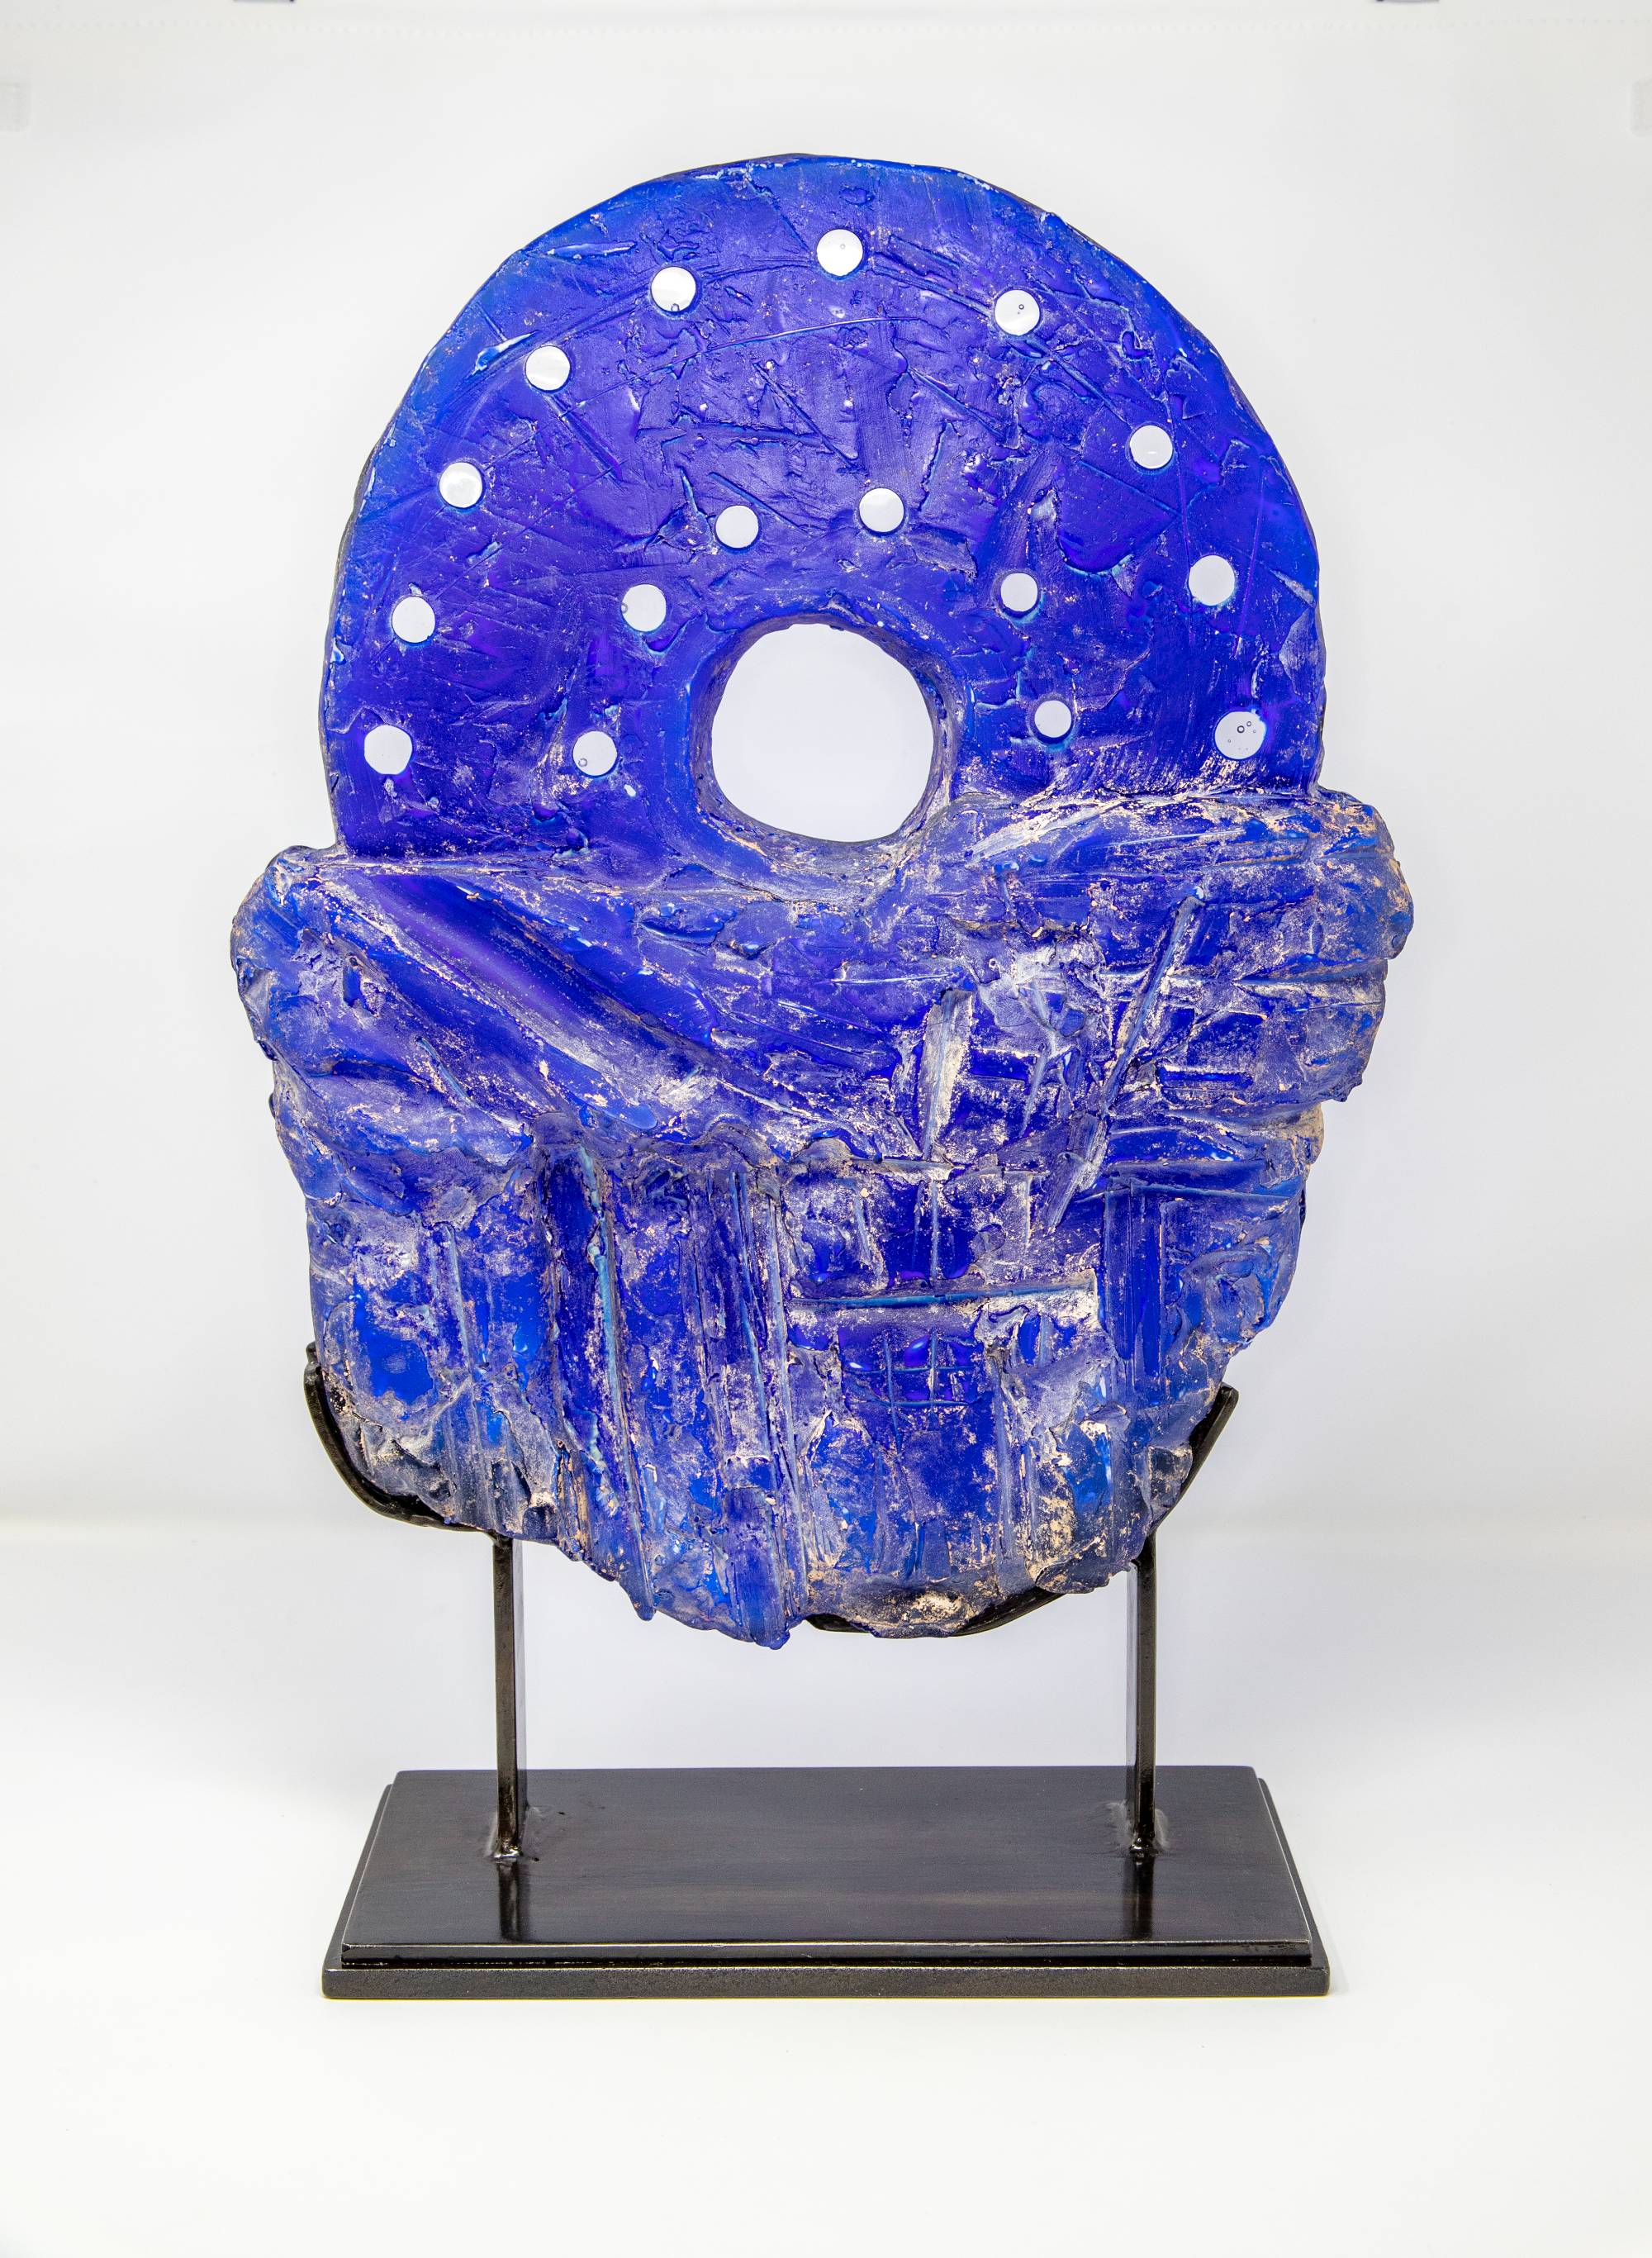 bright blue rough rock formation with wheel-shaped form emerging from the top